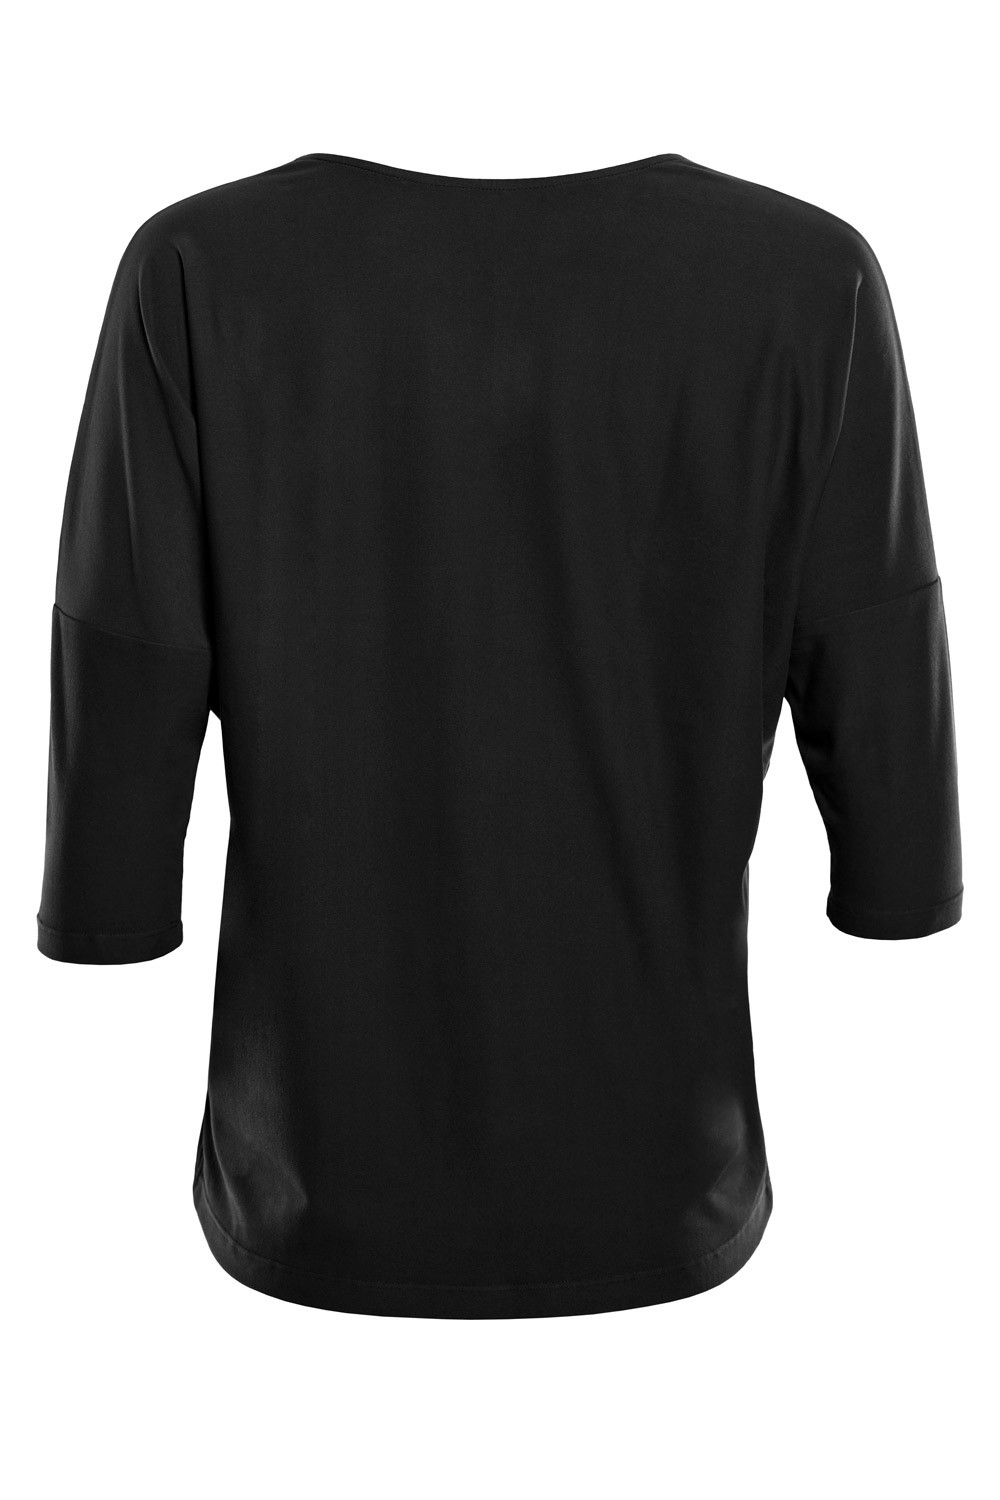 Functional Light and Soft Winshape Top Soft Ultra Style schwarz, DT111LS, 3/4-Arm